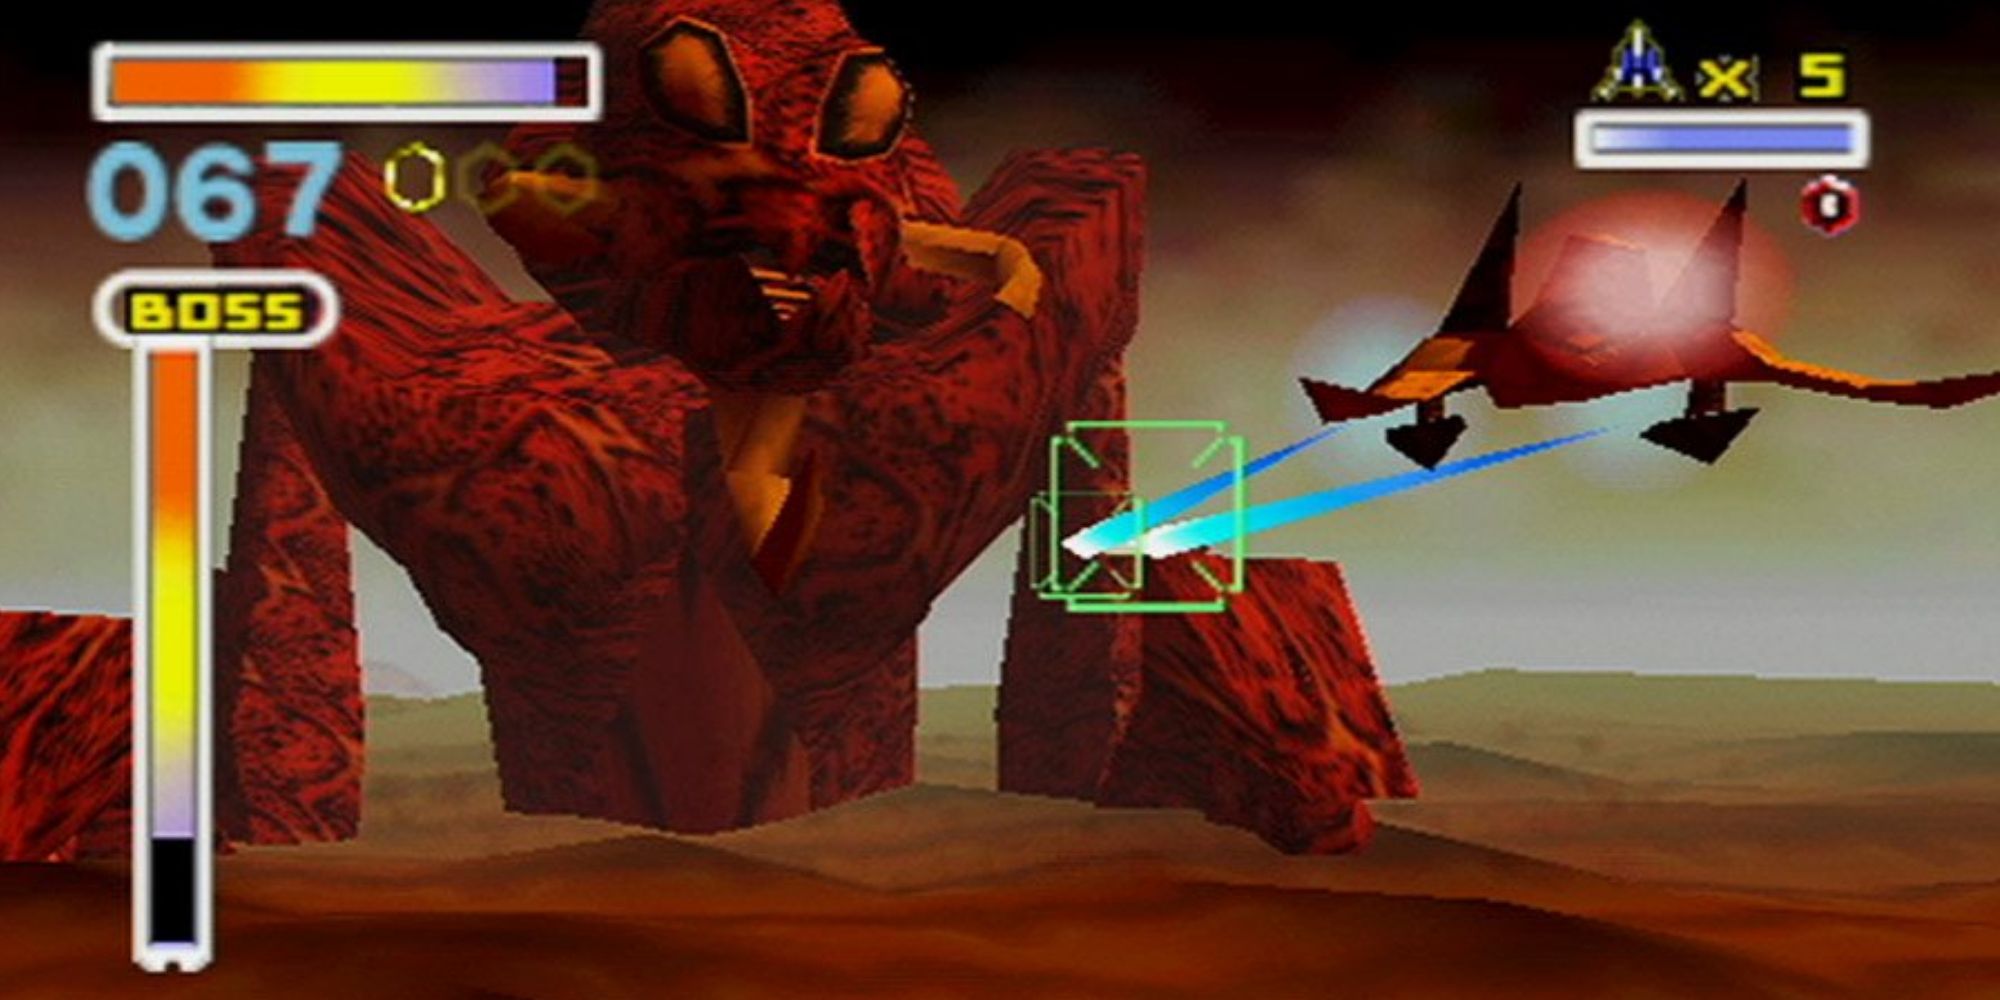 Fox's Arwing fires at a boss rising from the lava in Star Fox 64's Out of the Frying Pan level